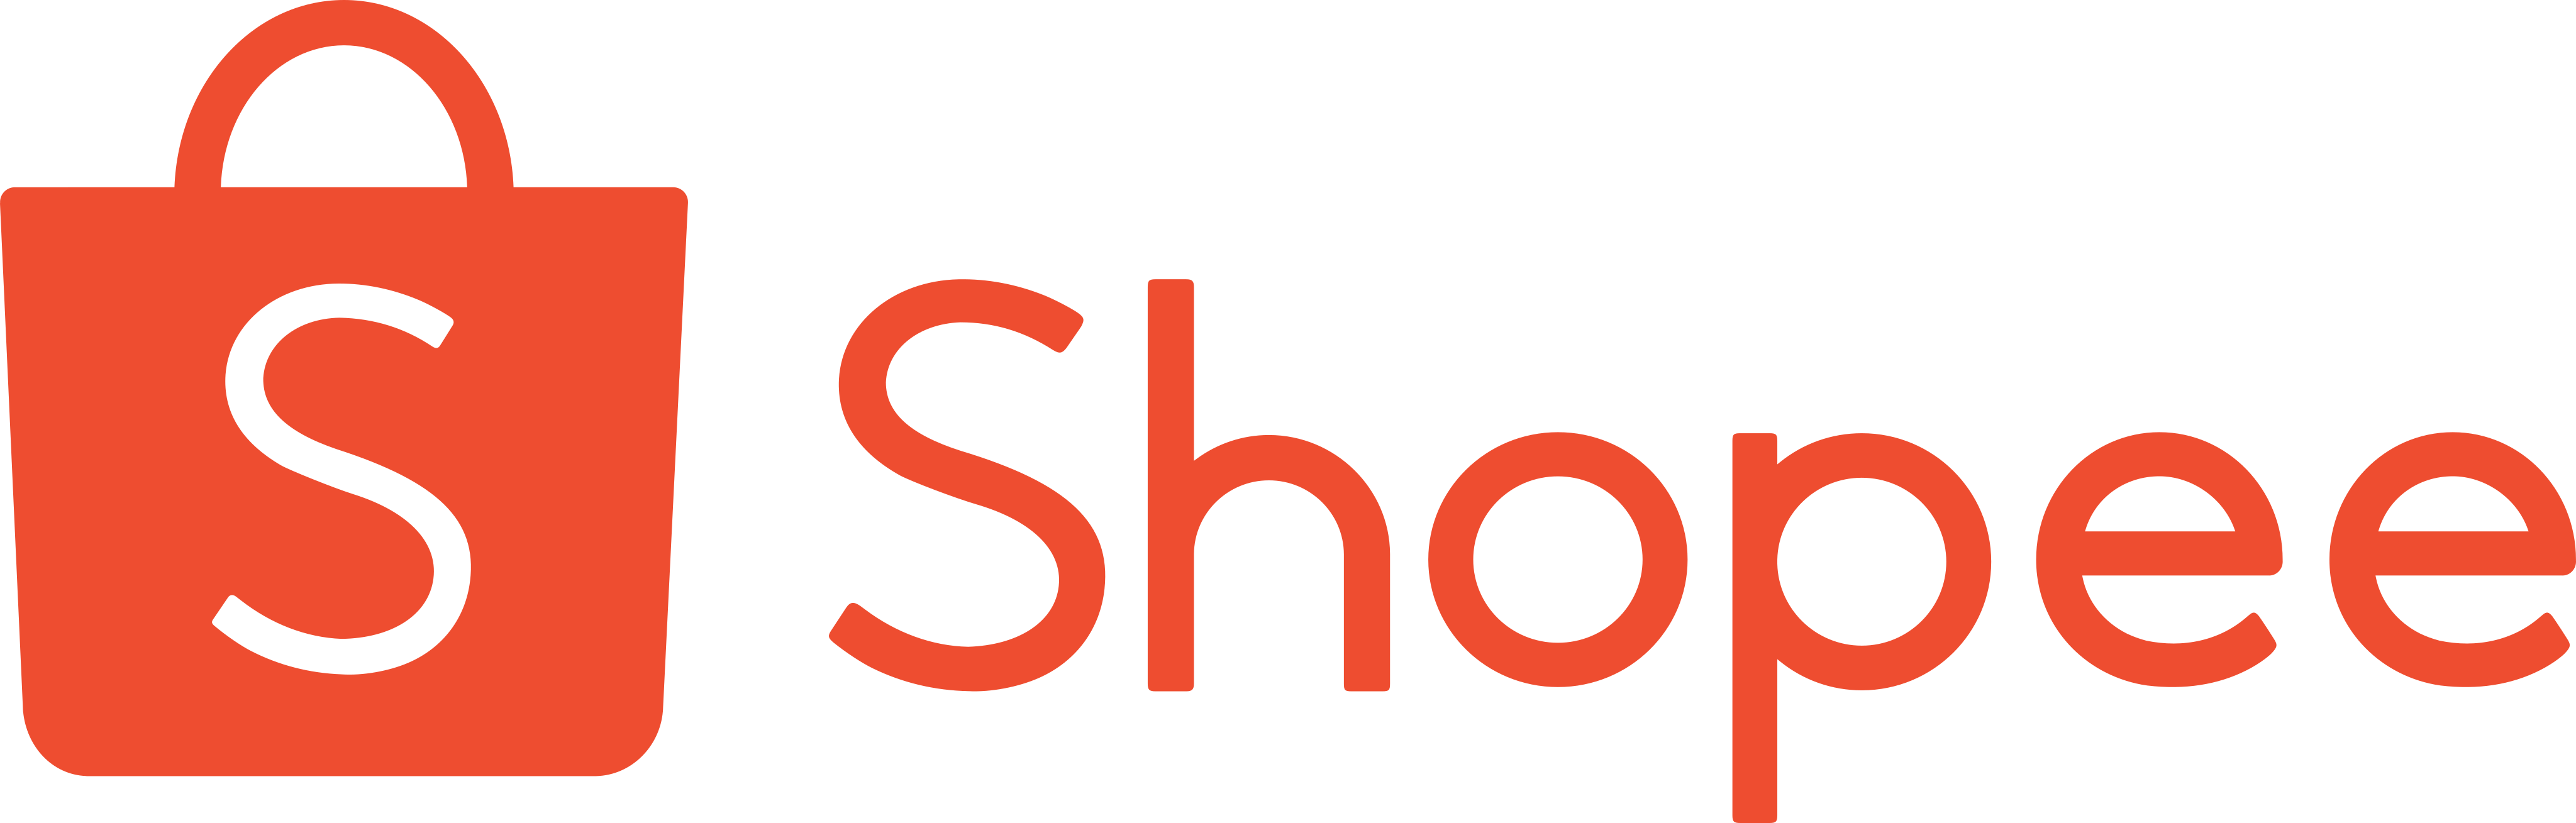 Shopee Logo - PNG and Vector - Logo Download